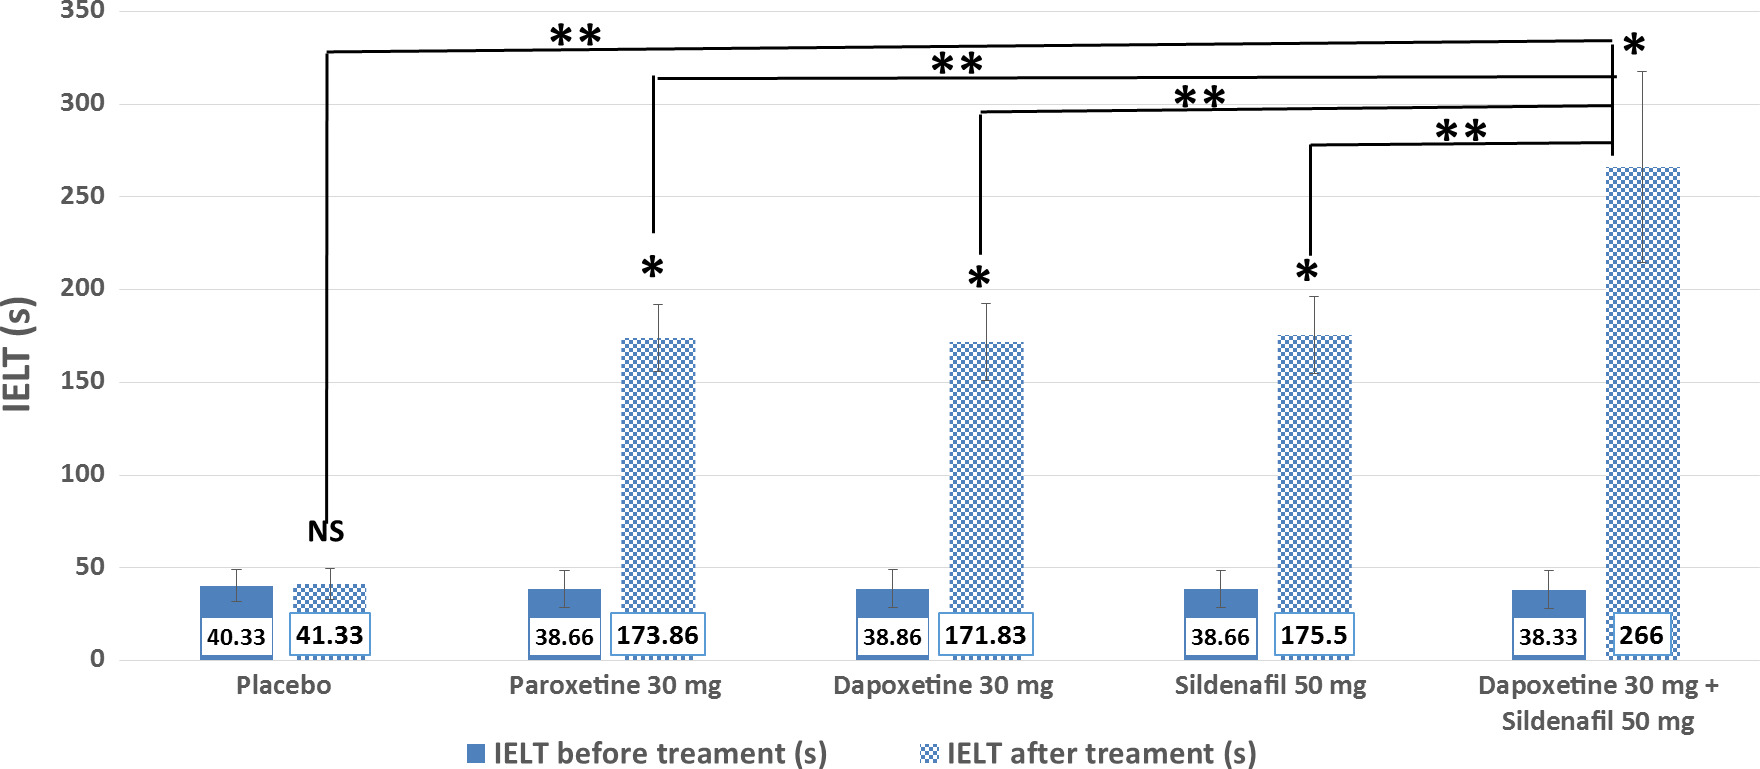 Comparison of the clinical efficacy and safety of the on-demand use of paroxetine, dapoxetine, sildenafil and combined dapoxetine with sildenafil in treatment of patients with premature ejaculation: A randomised placebo-controlled clinical trial.